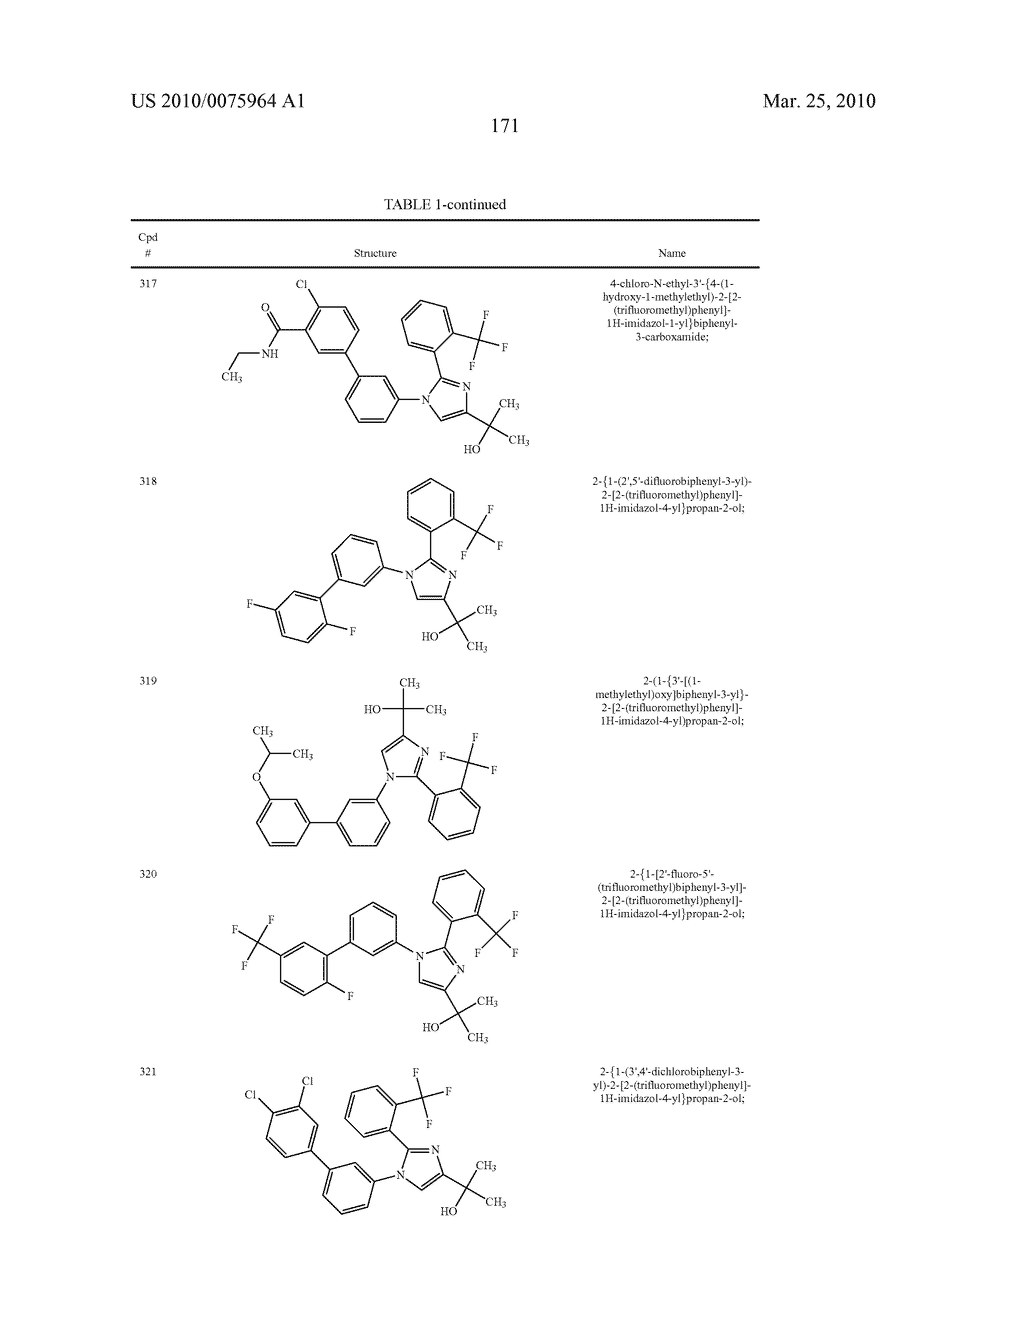 IMIDAZOLE BASED LXR MODULATORS - diagram, schematic, and image 172